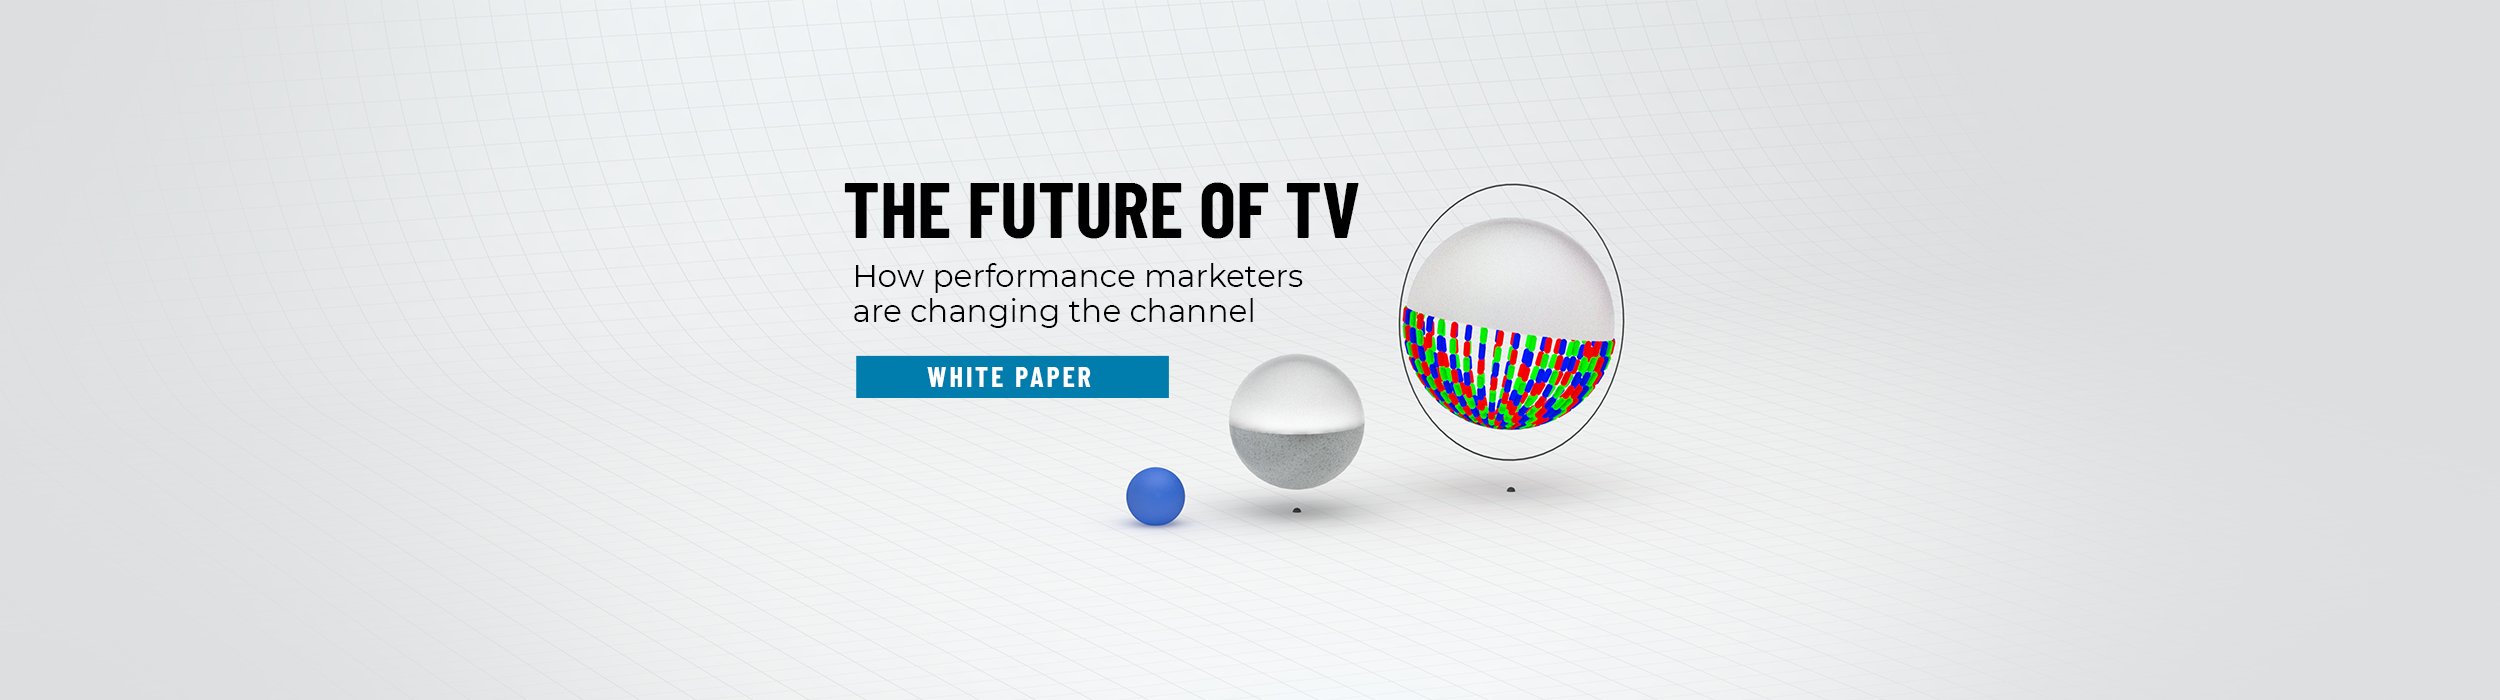 The Future of TV Advertising for Performance Marketers